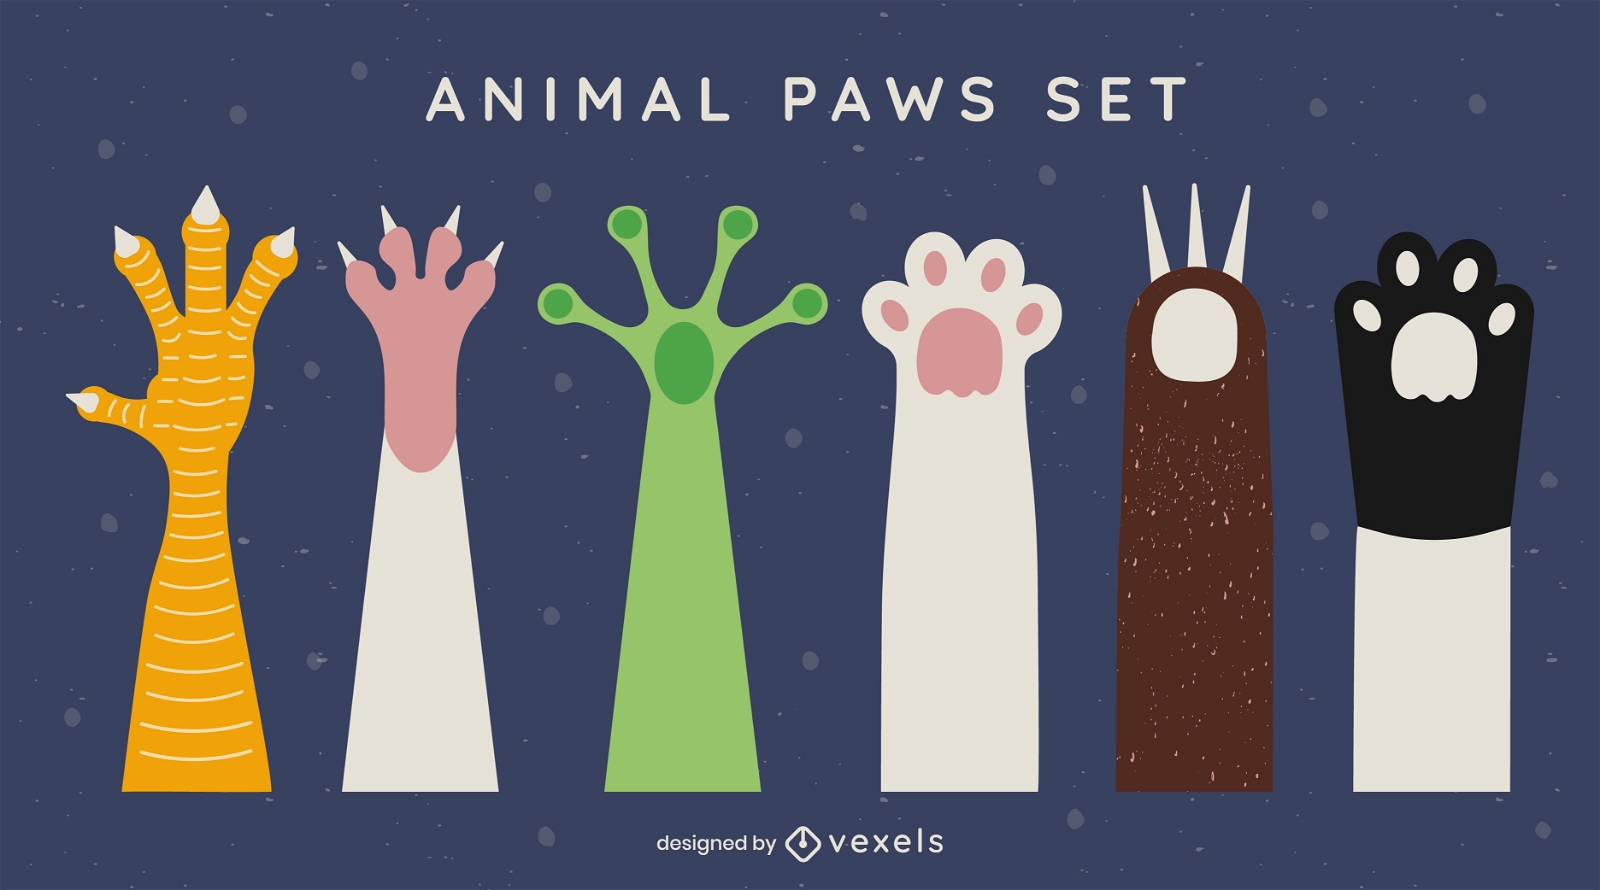 Animal and fantasy creature paws set